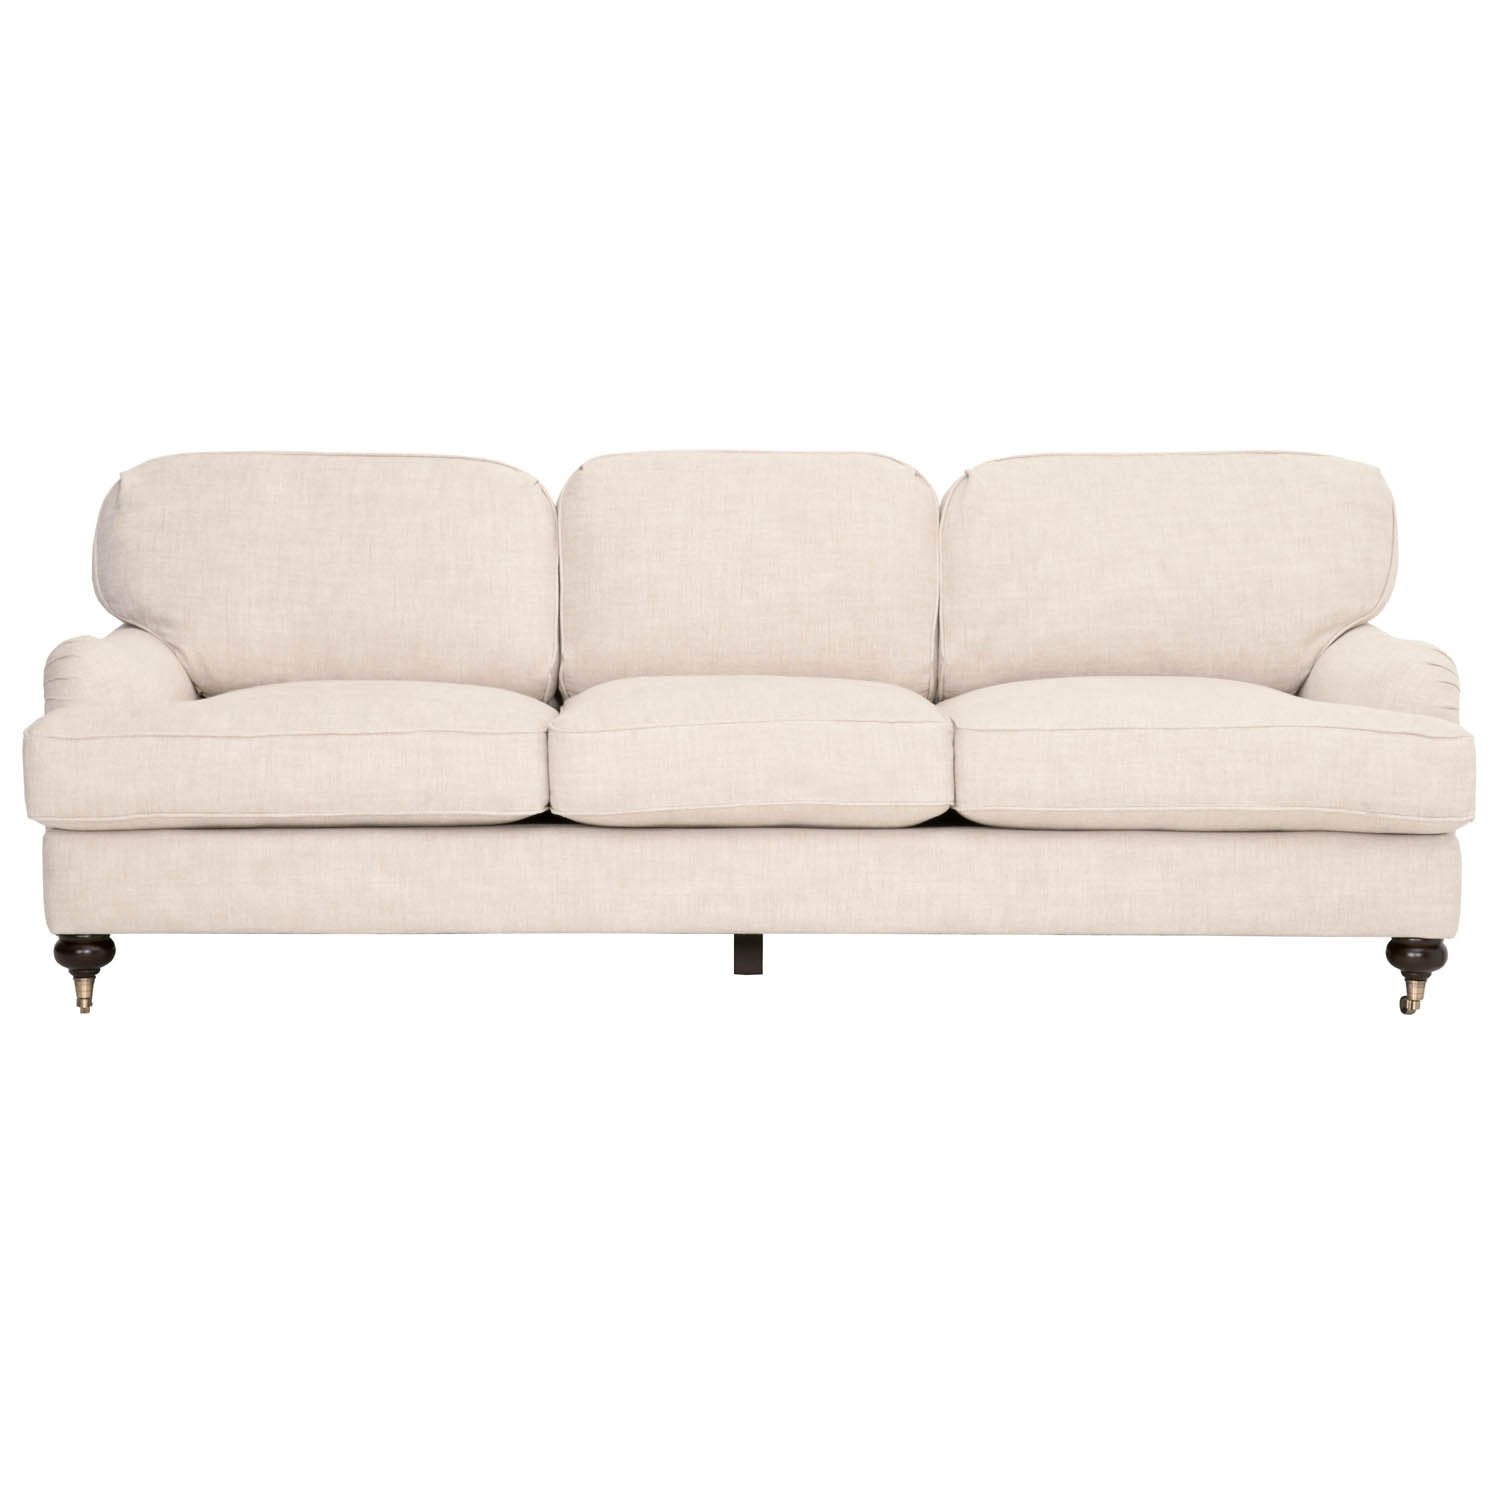 Charles 93" Sofa in Bisque French Linen